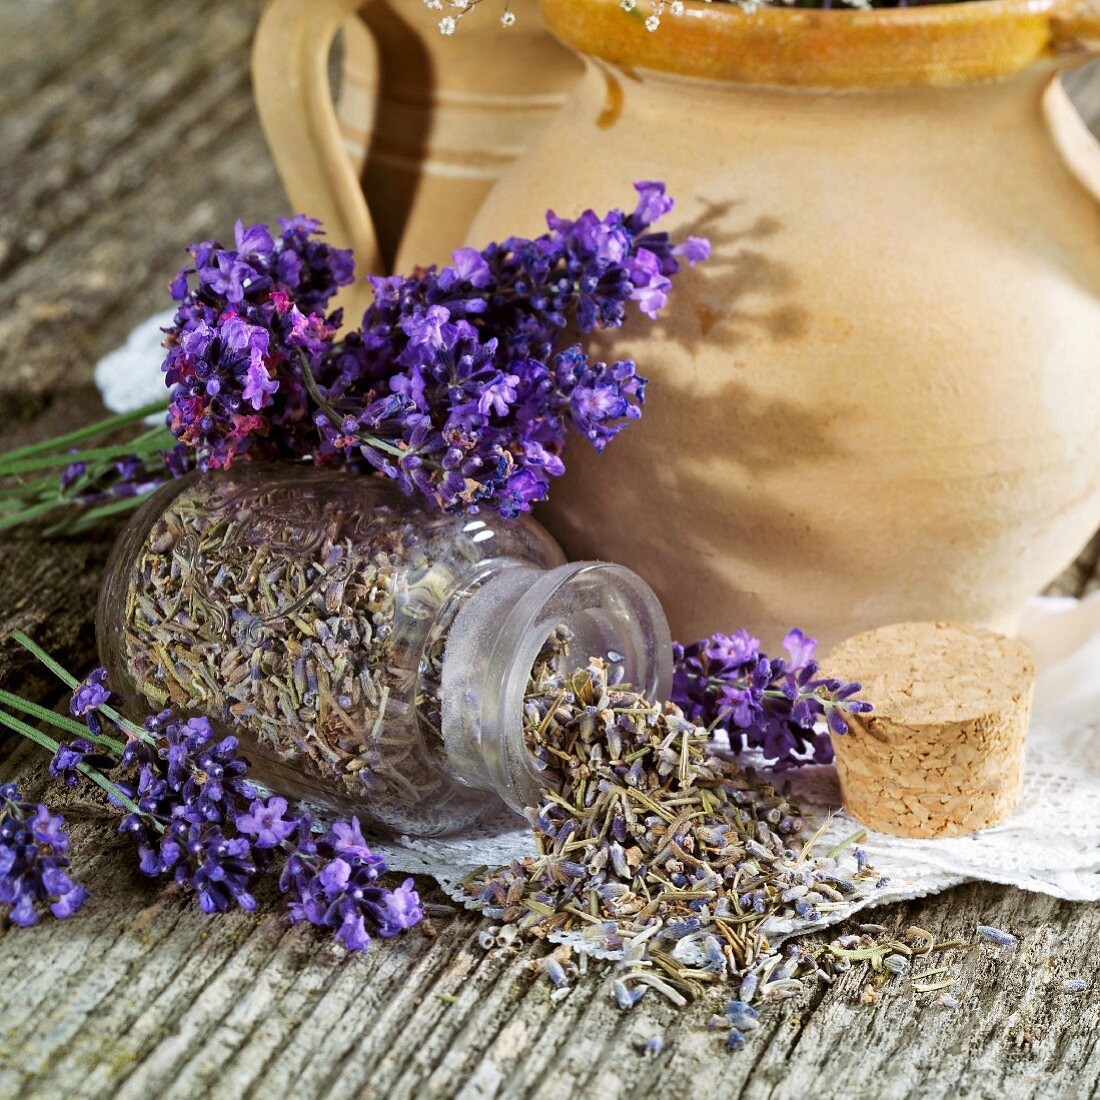 Flowering and dried lavender